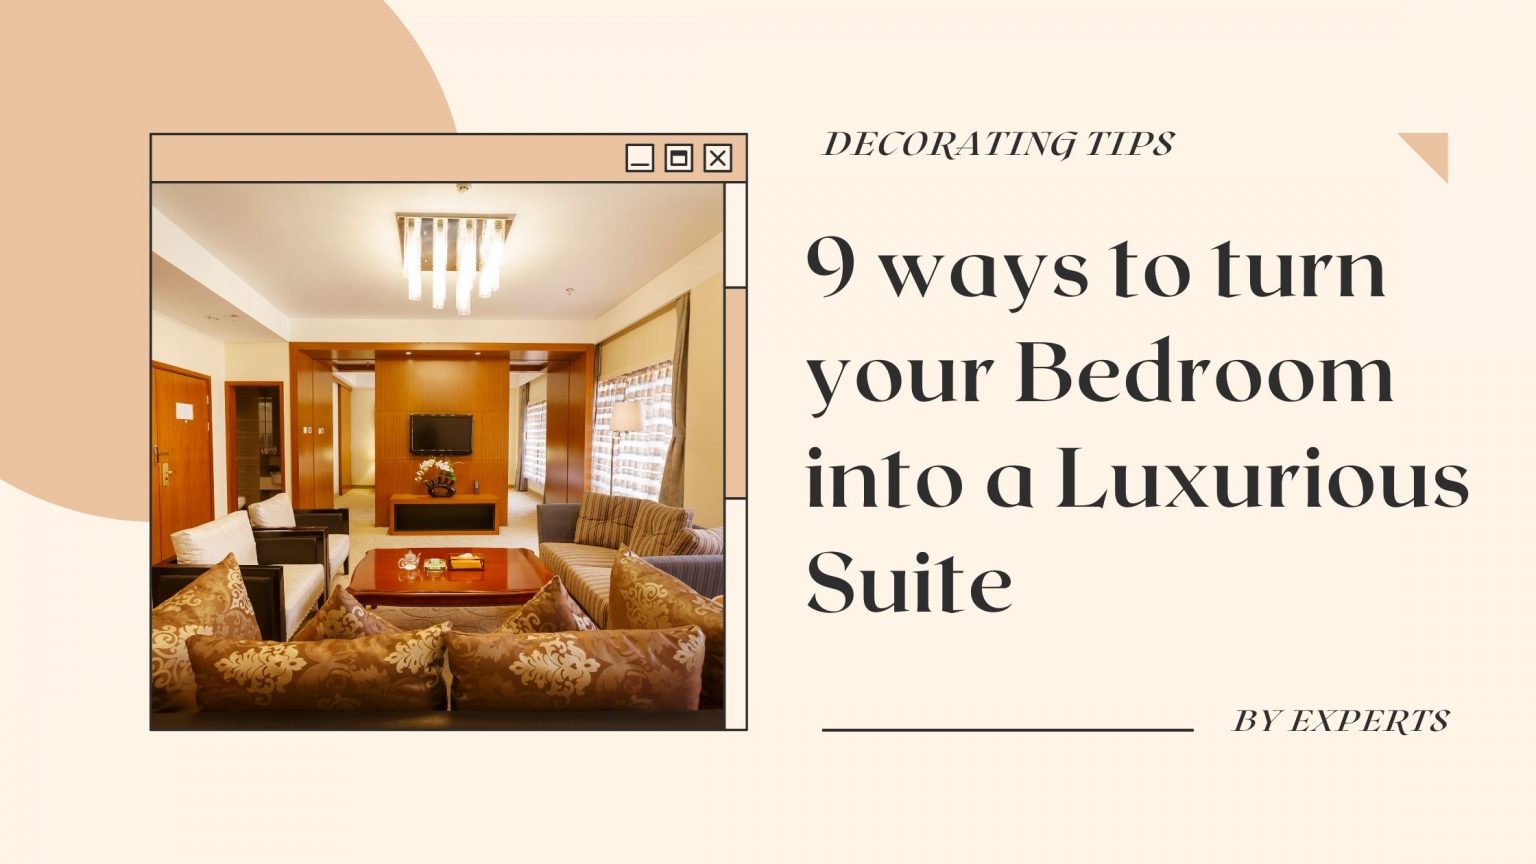 9 ways to turn your Bedroom into a Luxurious Suite